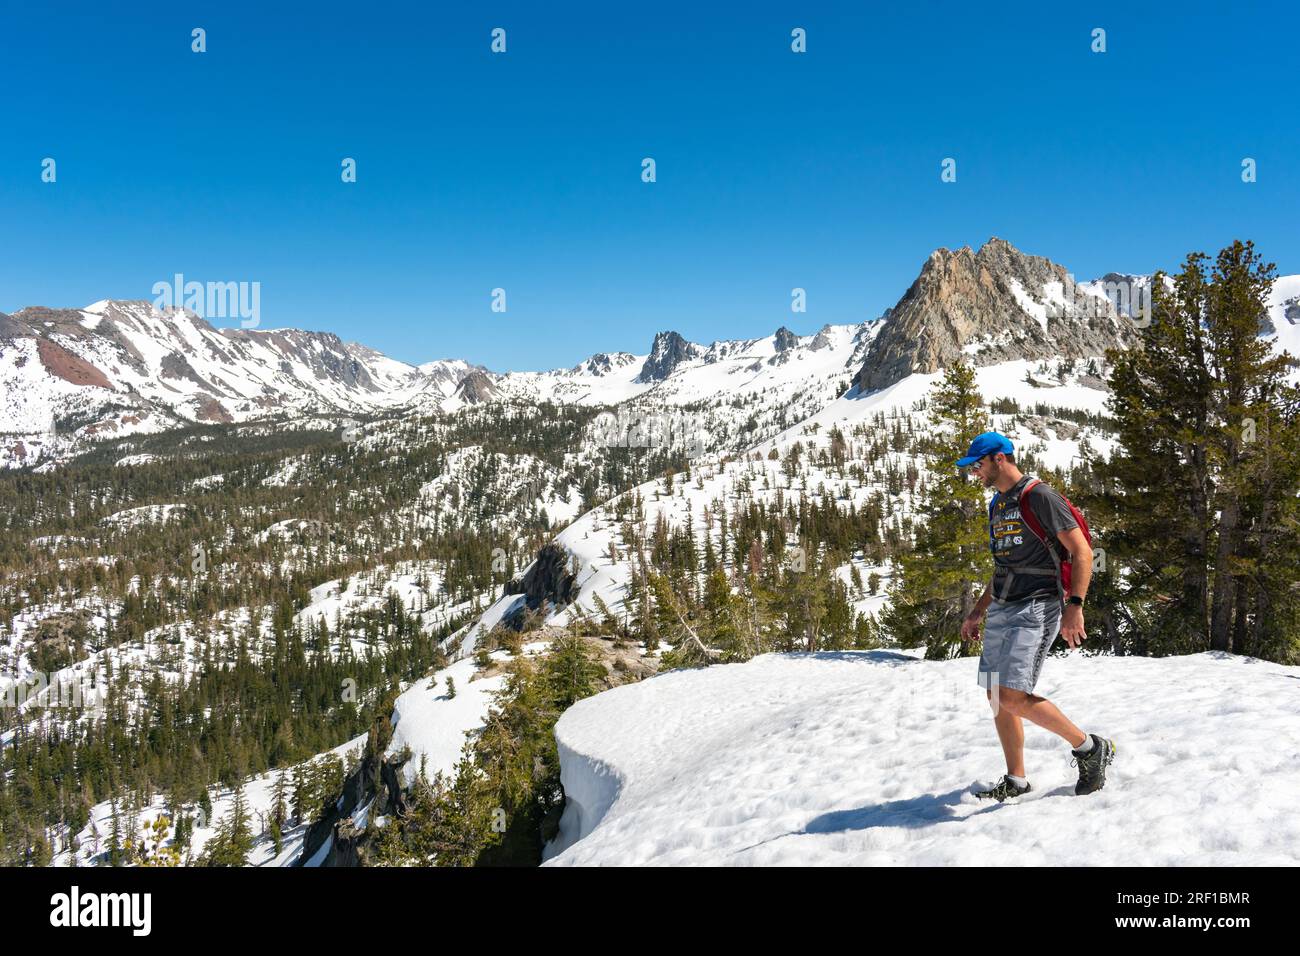 An adventurer enjoys a serene hike through the melting snow paths of Mammoth Lakes, surrounded by majestic, snow-dusted peaks under a brilliant blue s Stock Photo